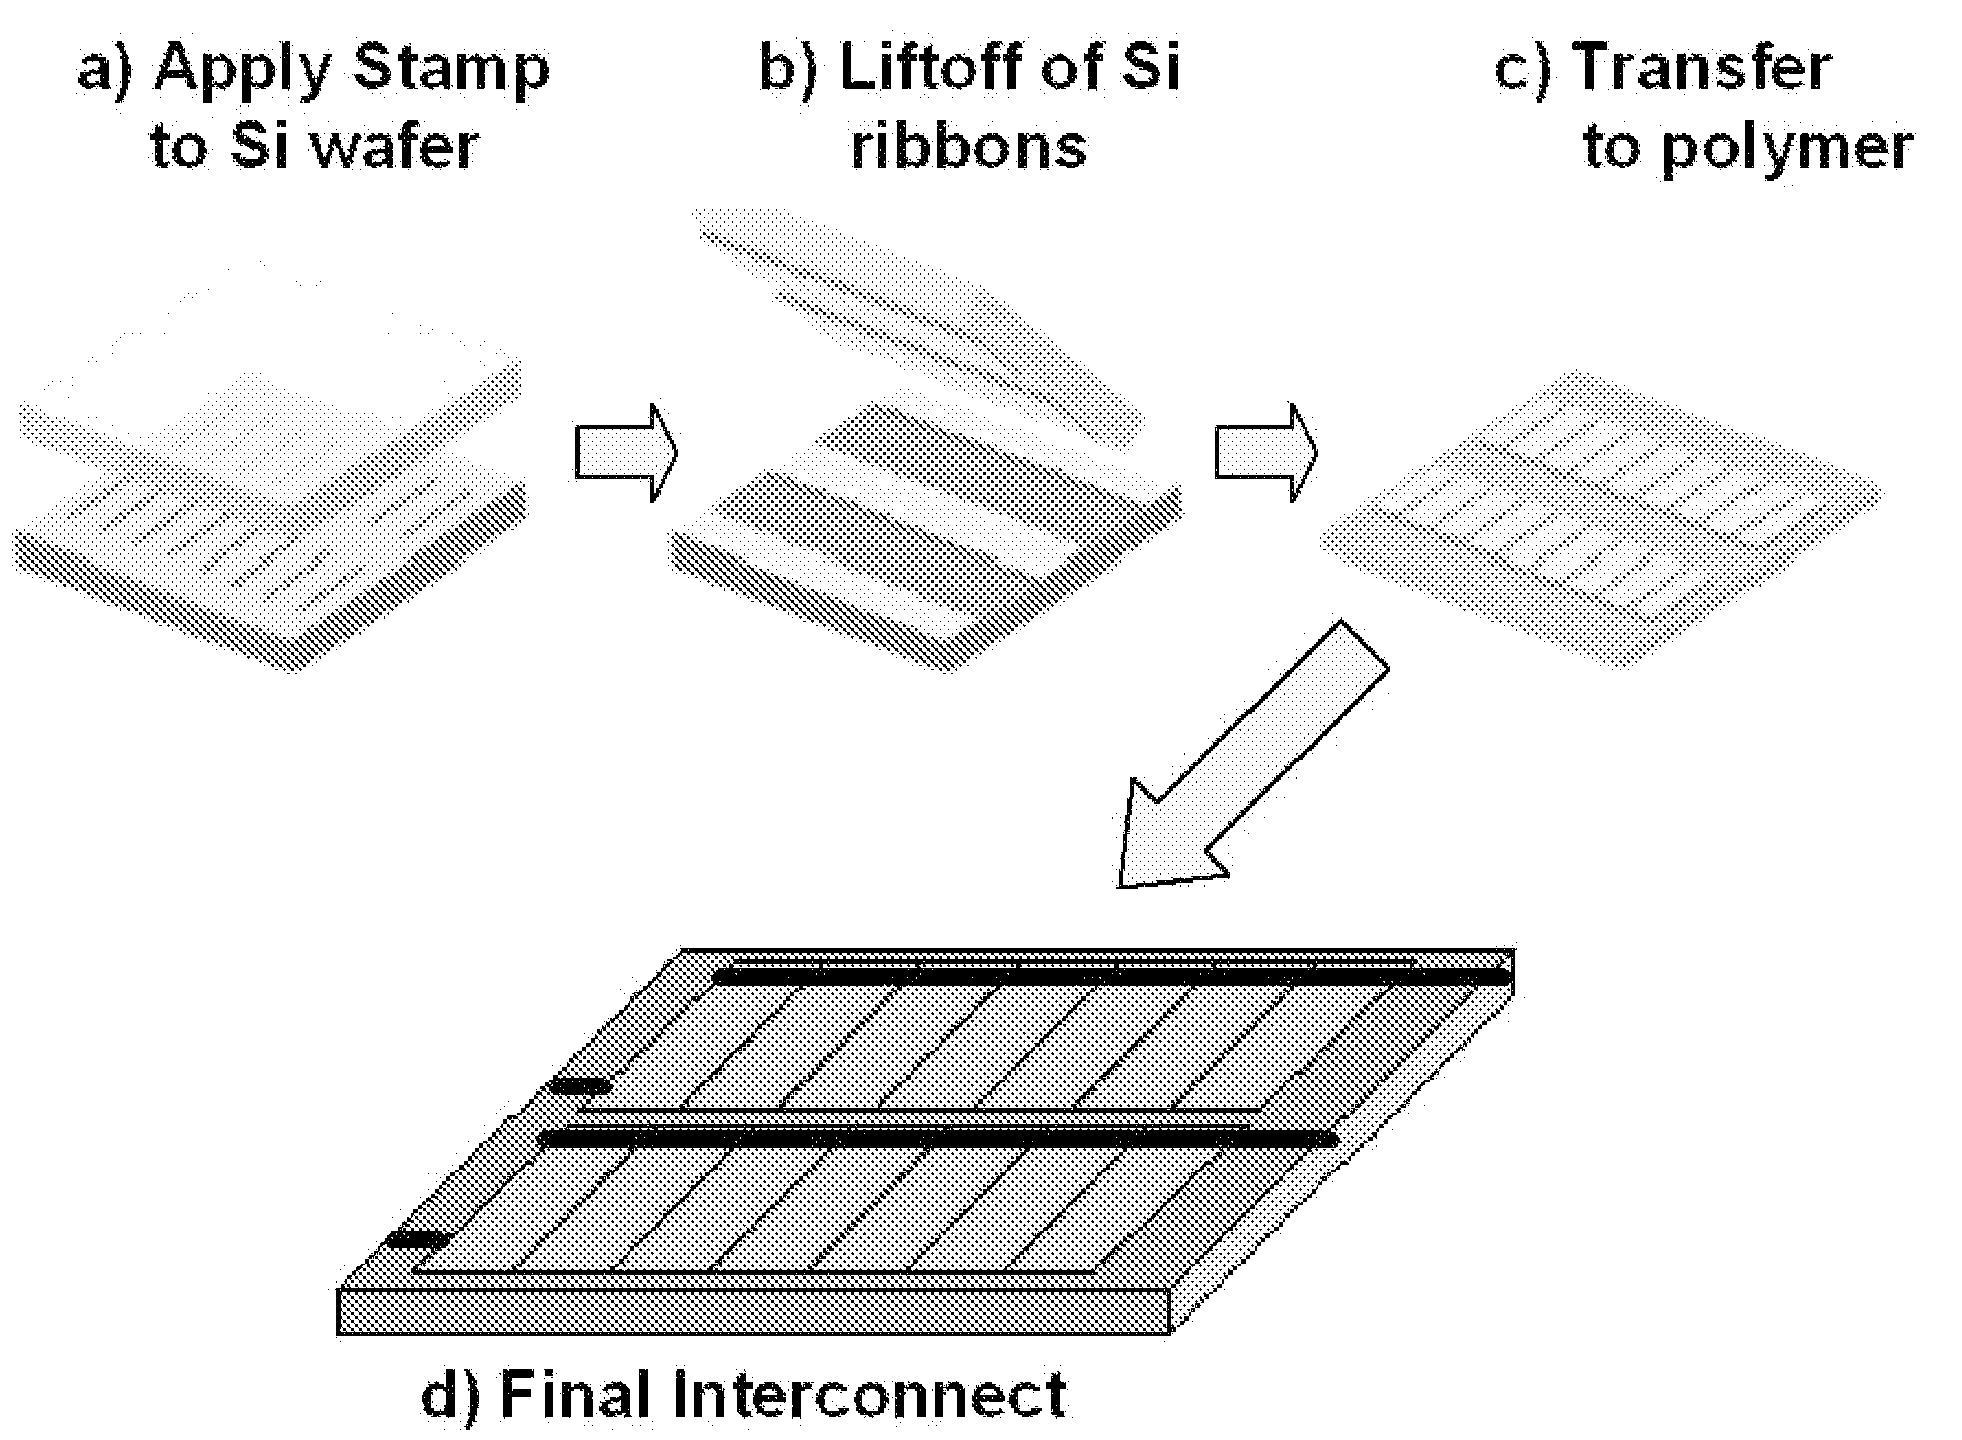 Arrays of ultrathin silicon solar microcells